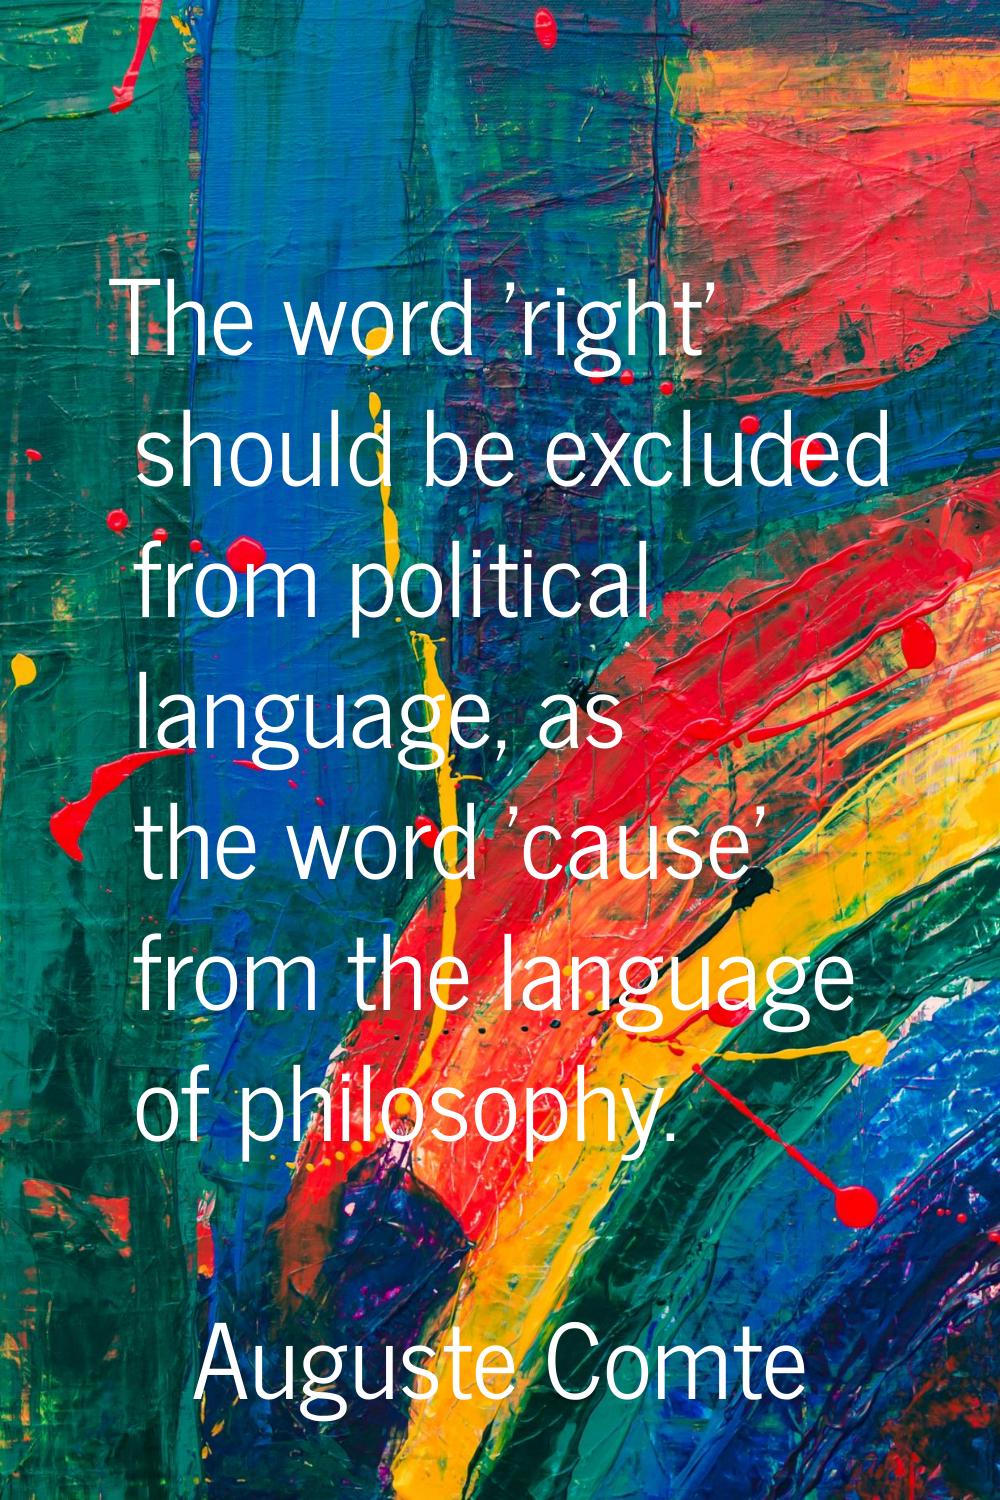 The word 'right' should be excluded from political language, as the word 'cause' from the language 